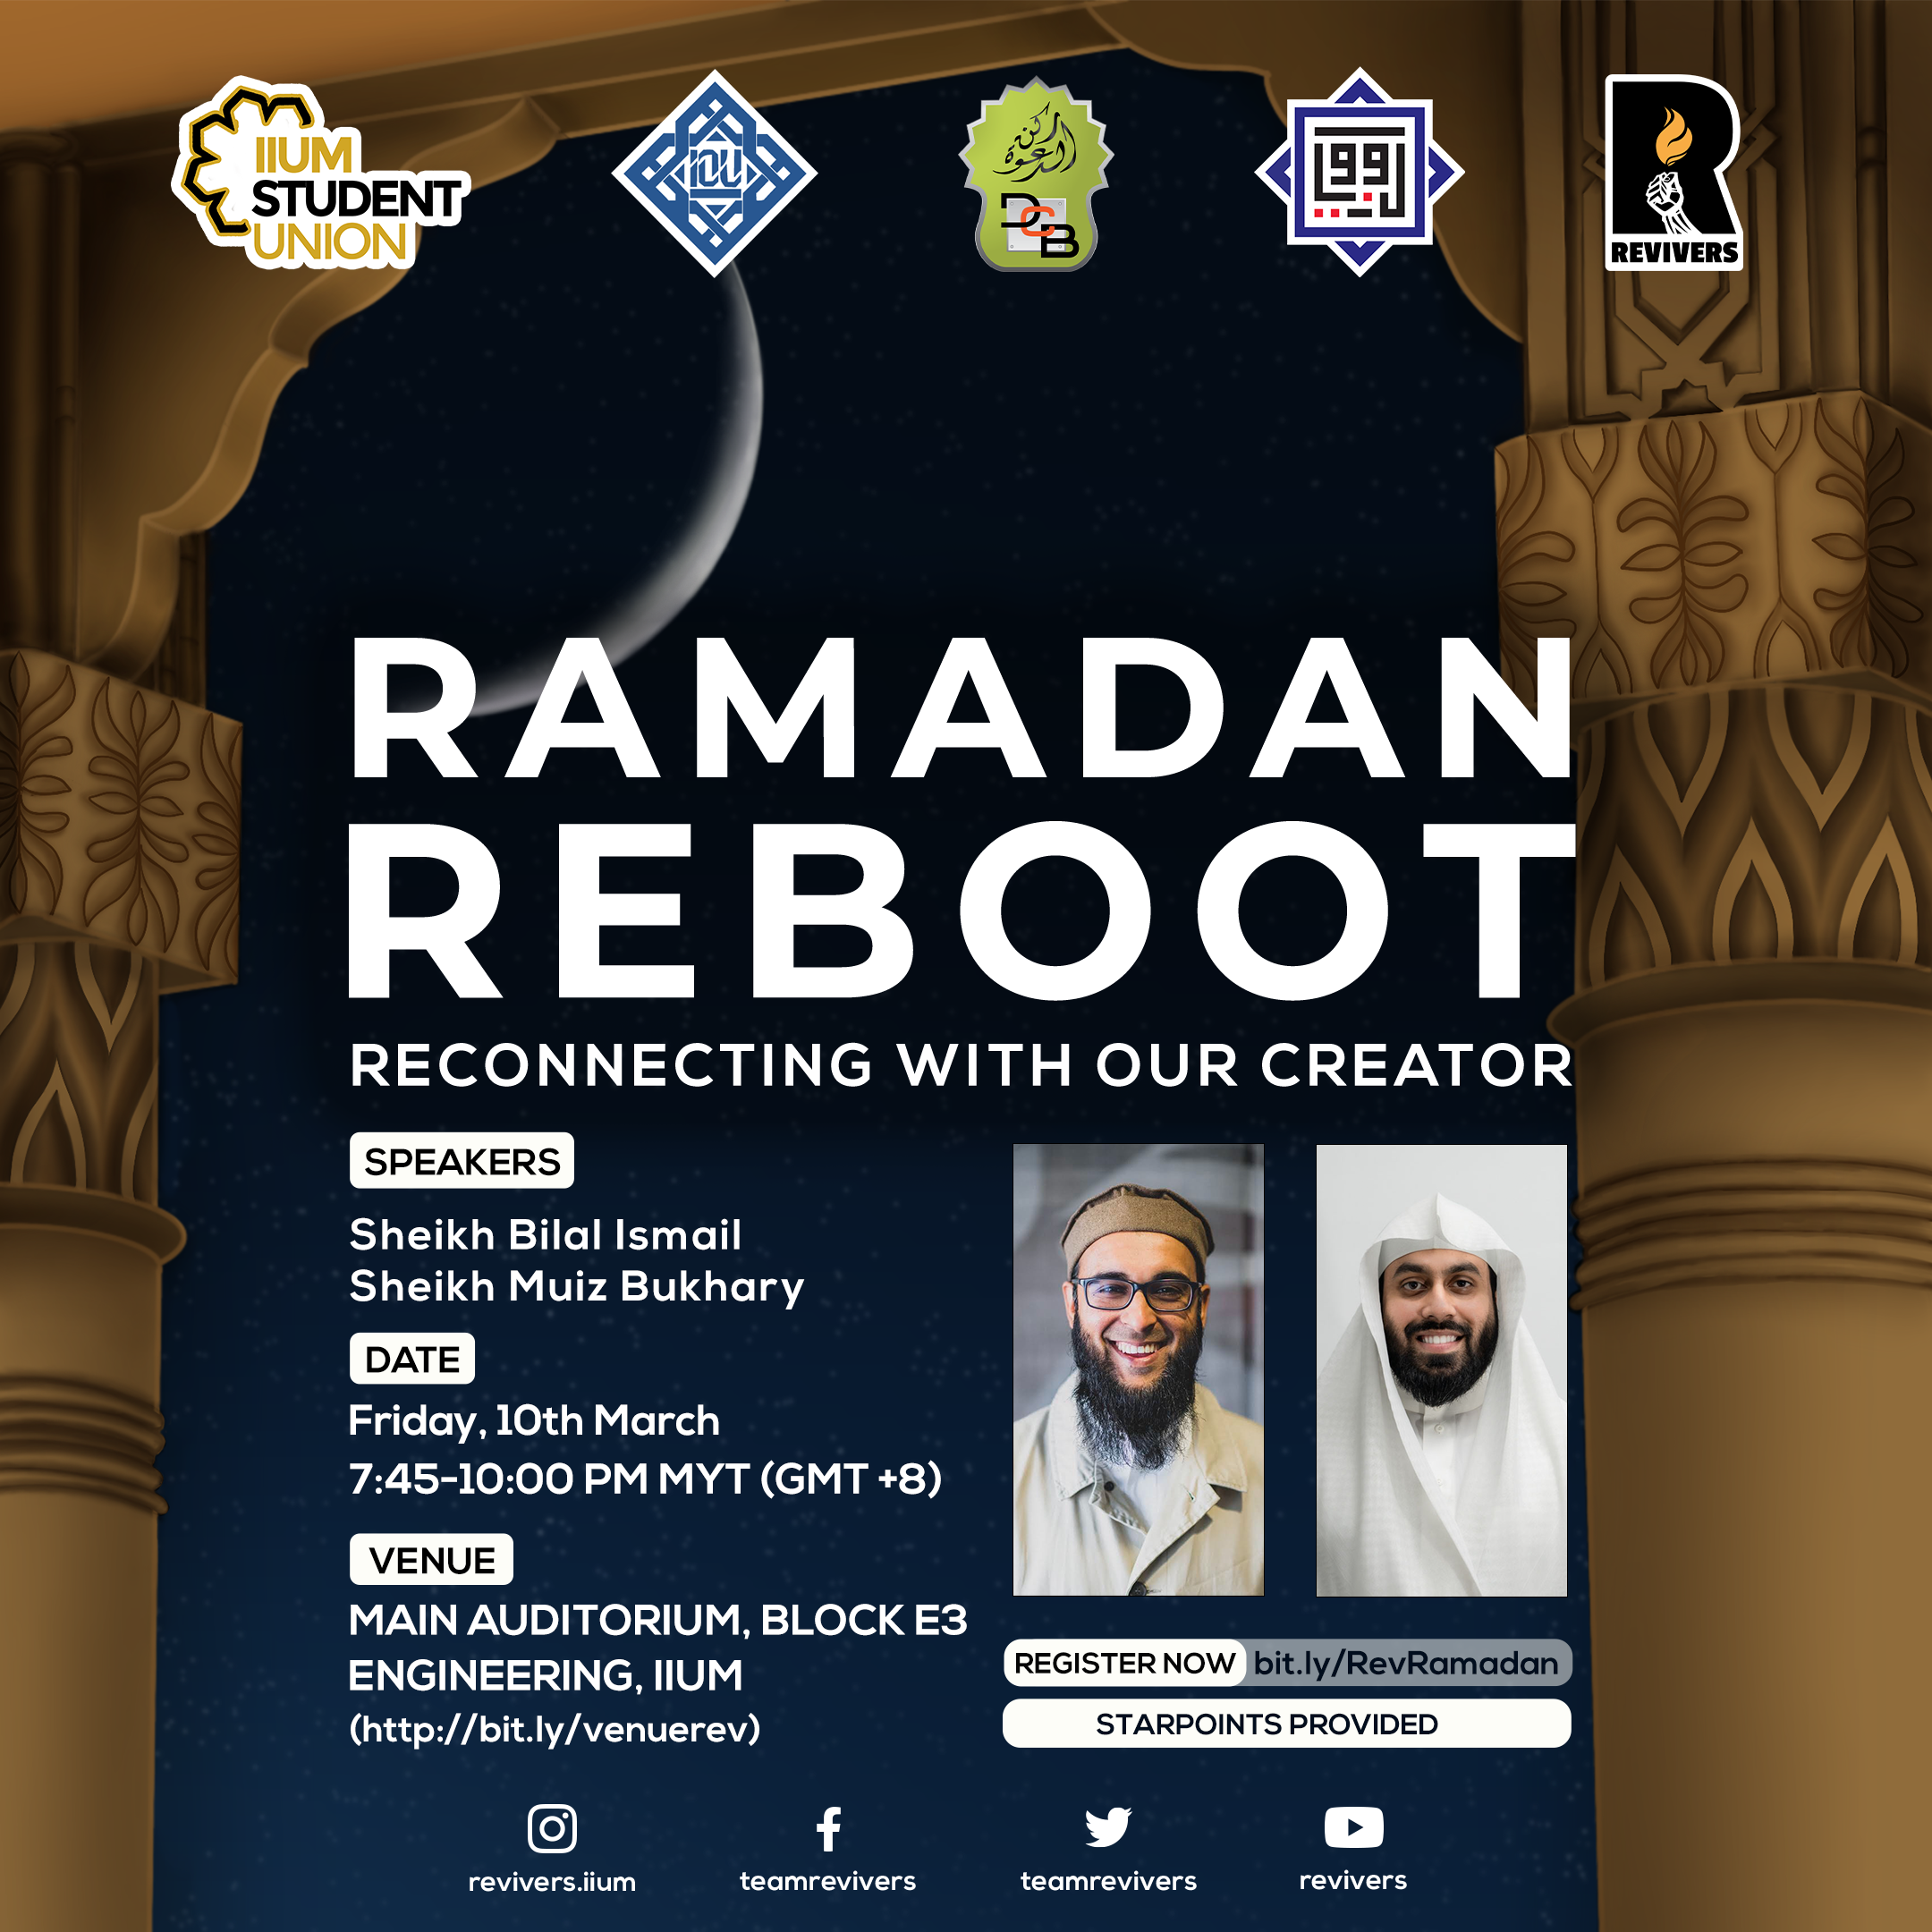 RAMADAN REBOOT ( RECONNECTING WITH OUR CREATOR )